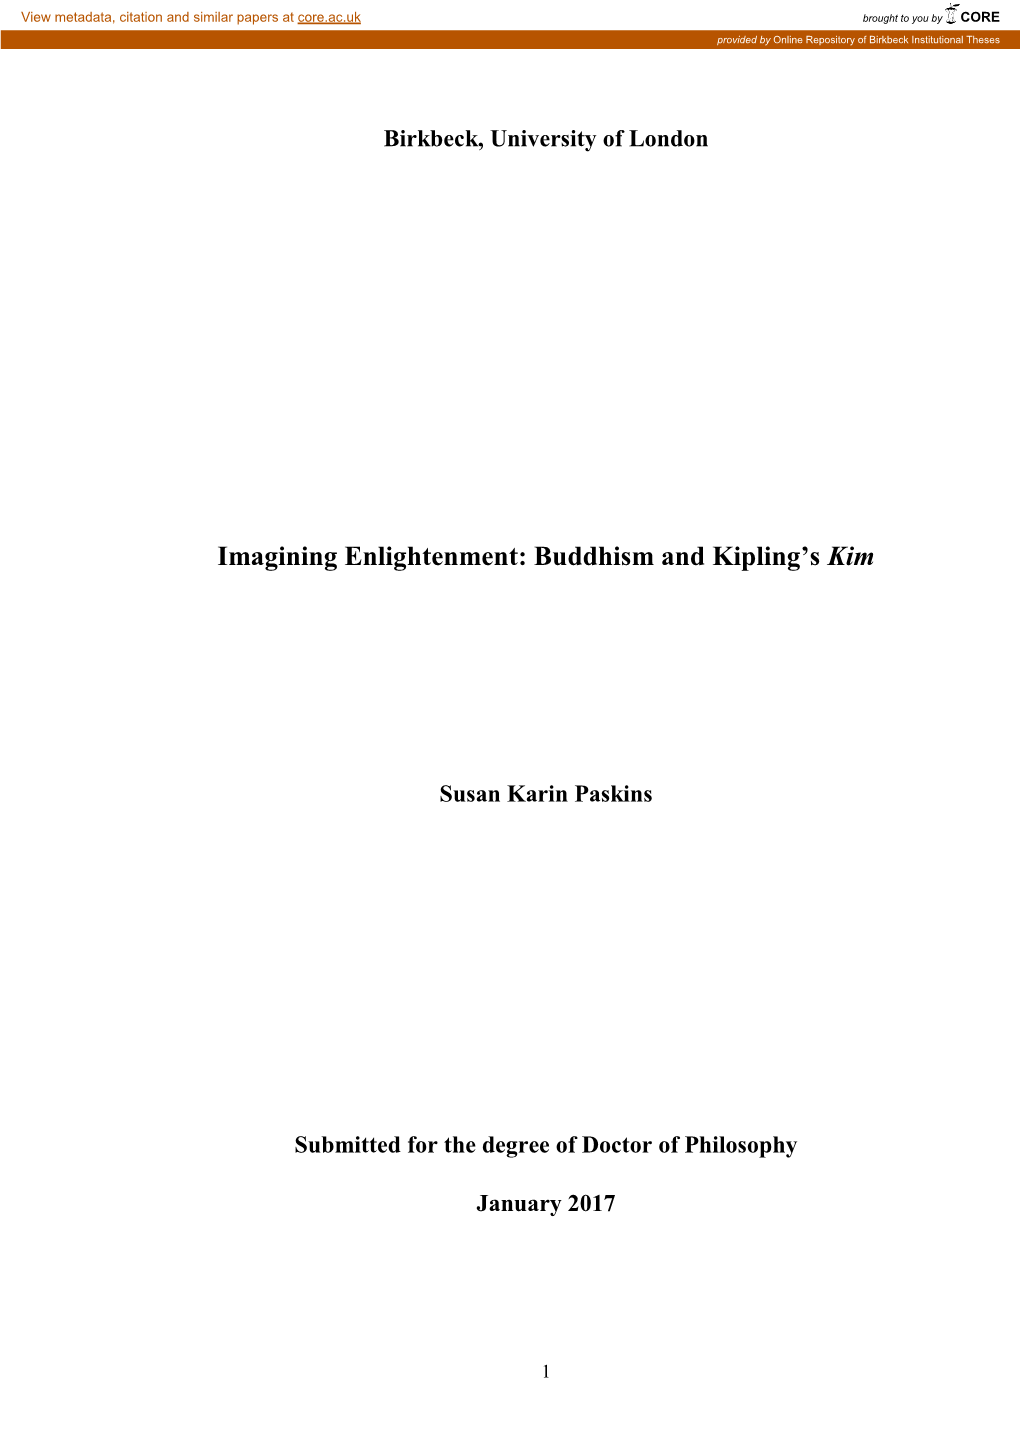 Imagining Enlightenment: Buddhism and Kipling's